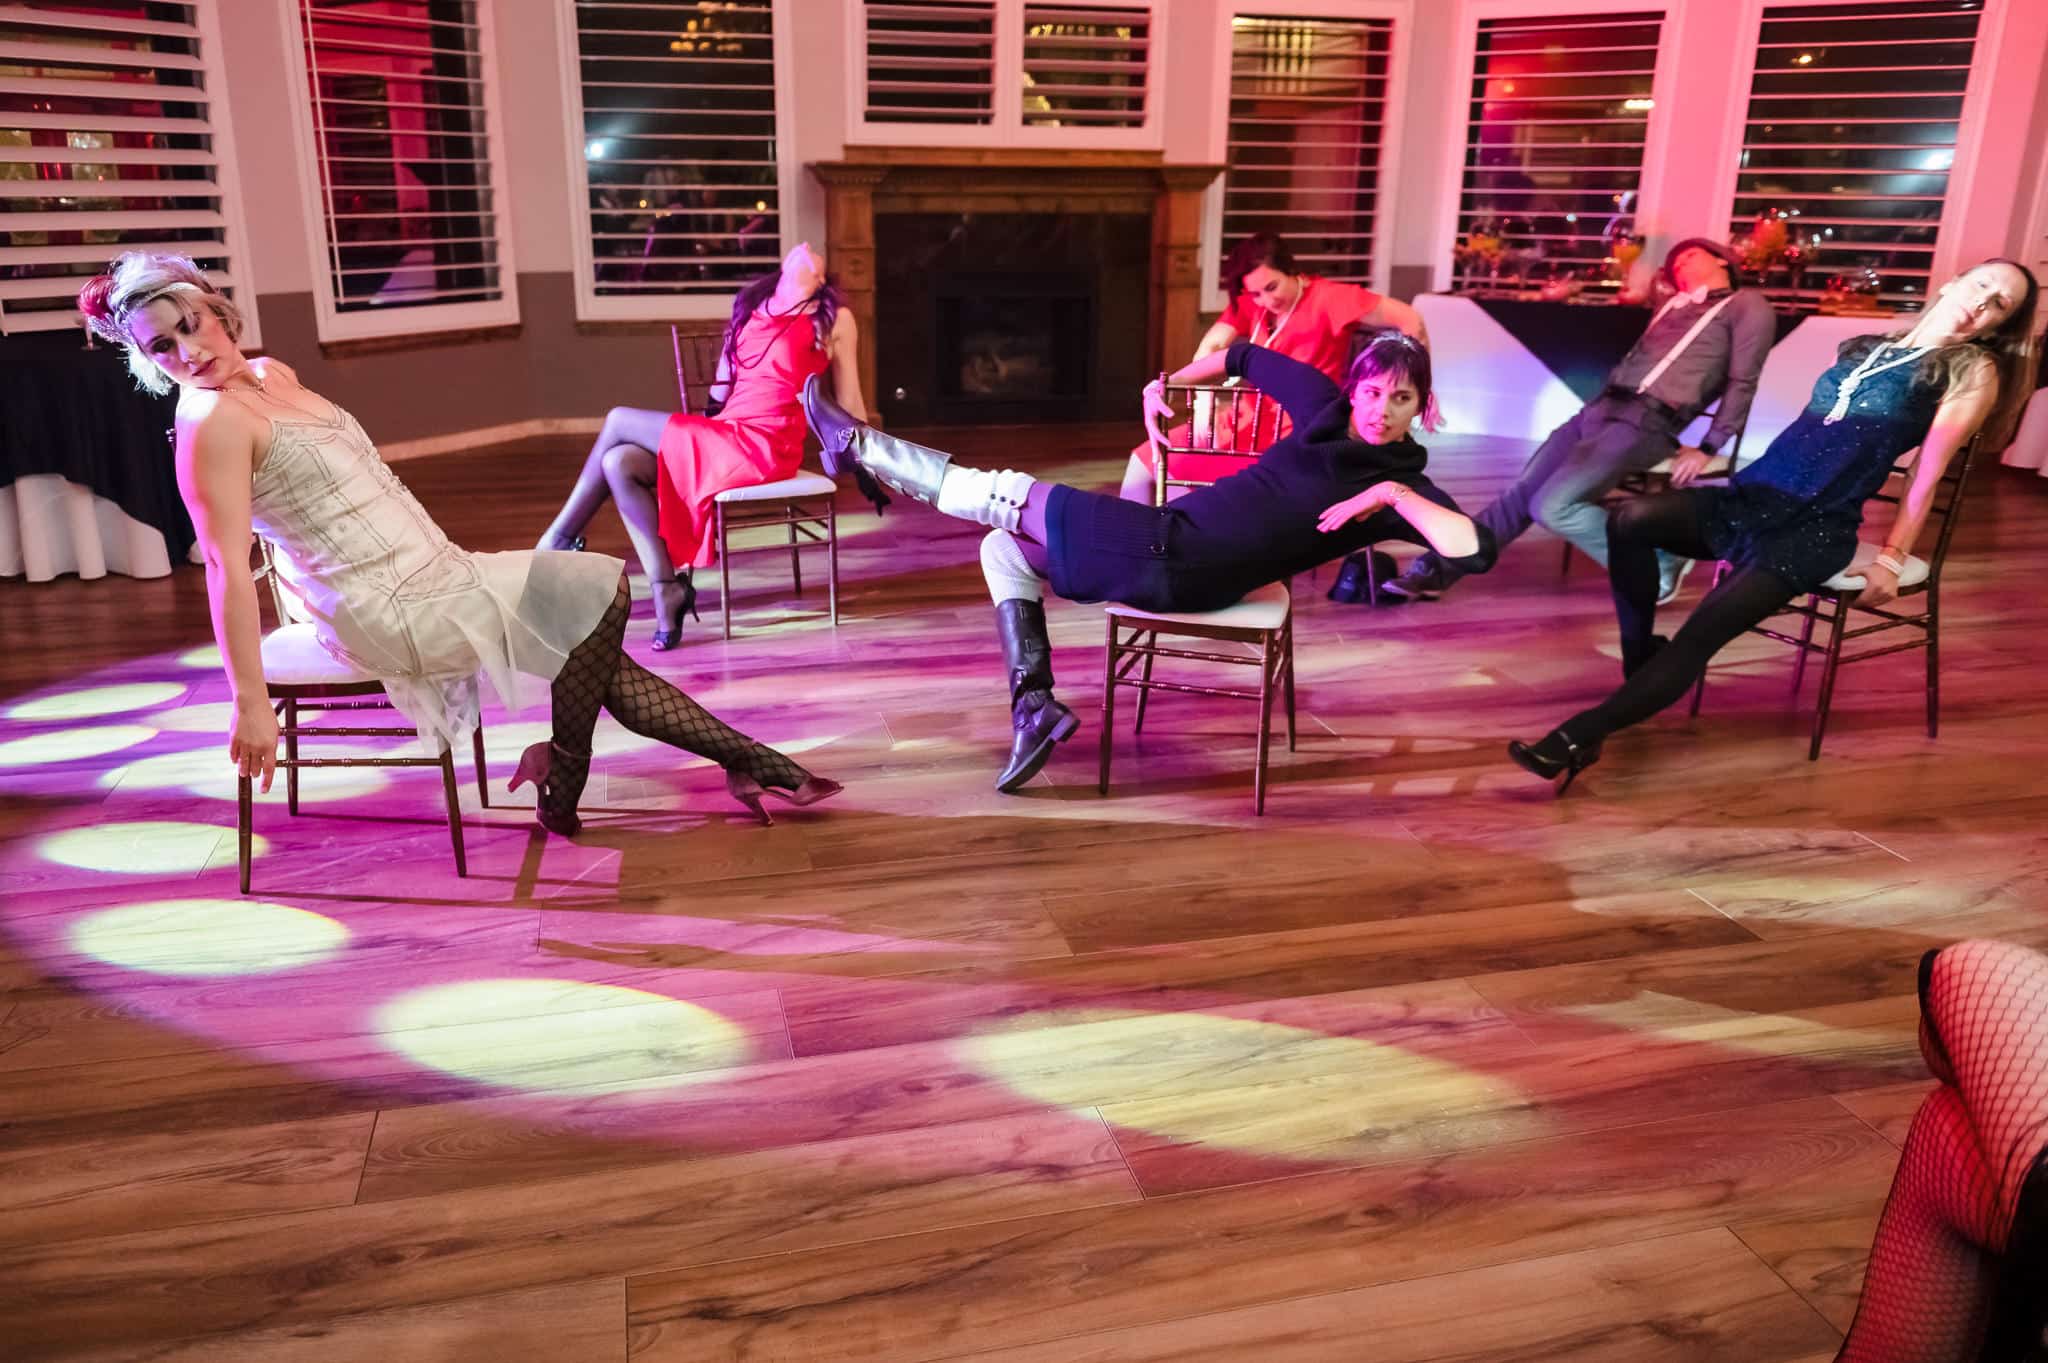 Several guests perform a dance routine they discovered on the internet that involve posing on and lifting chairs among the spotlights on the floor.